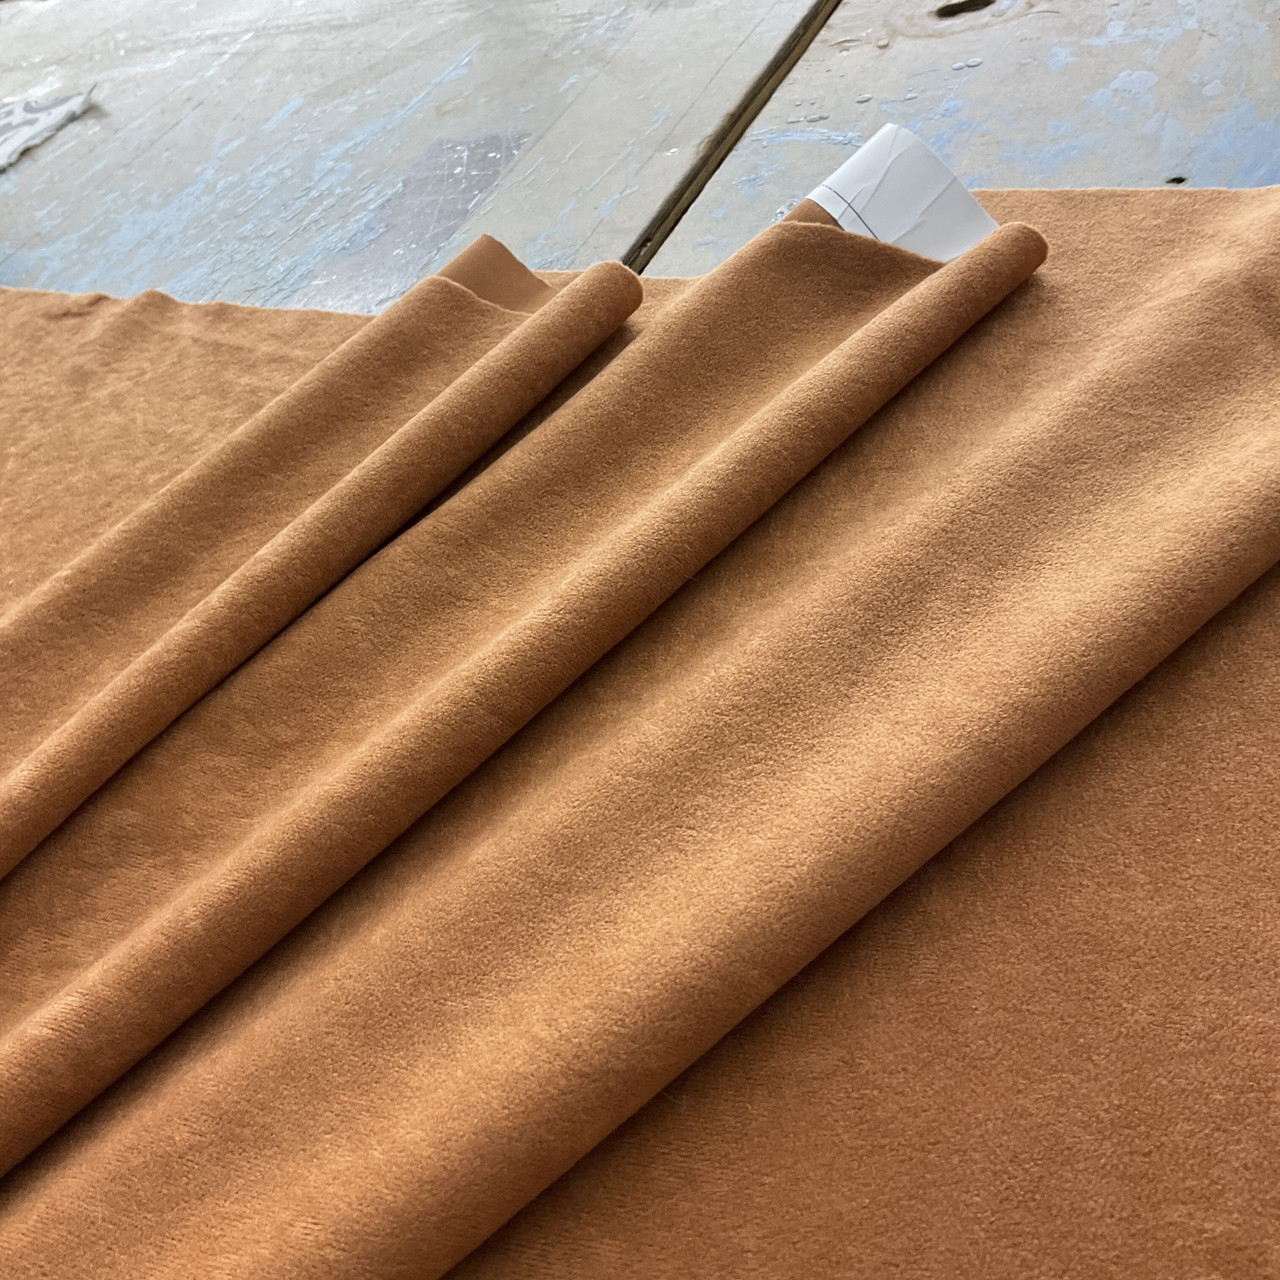 1.55 Yard Piece of Faux Suede Fabric, Light Tan